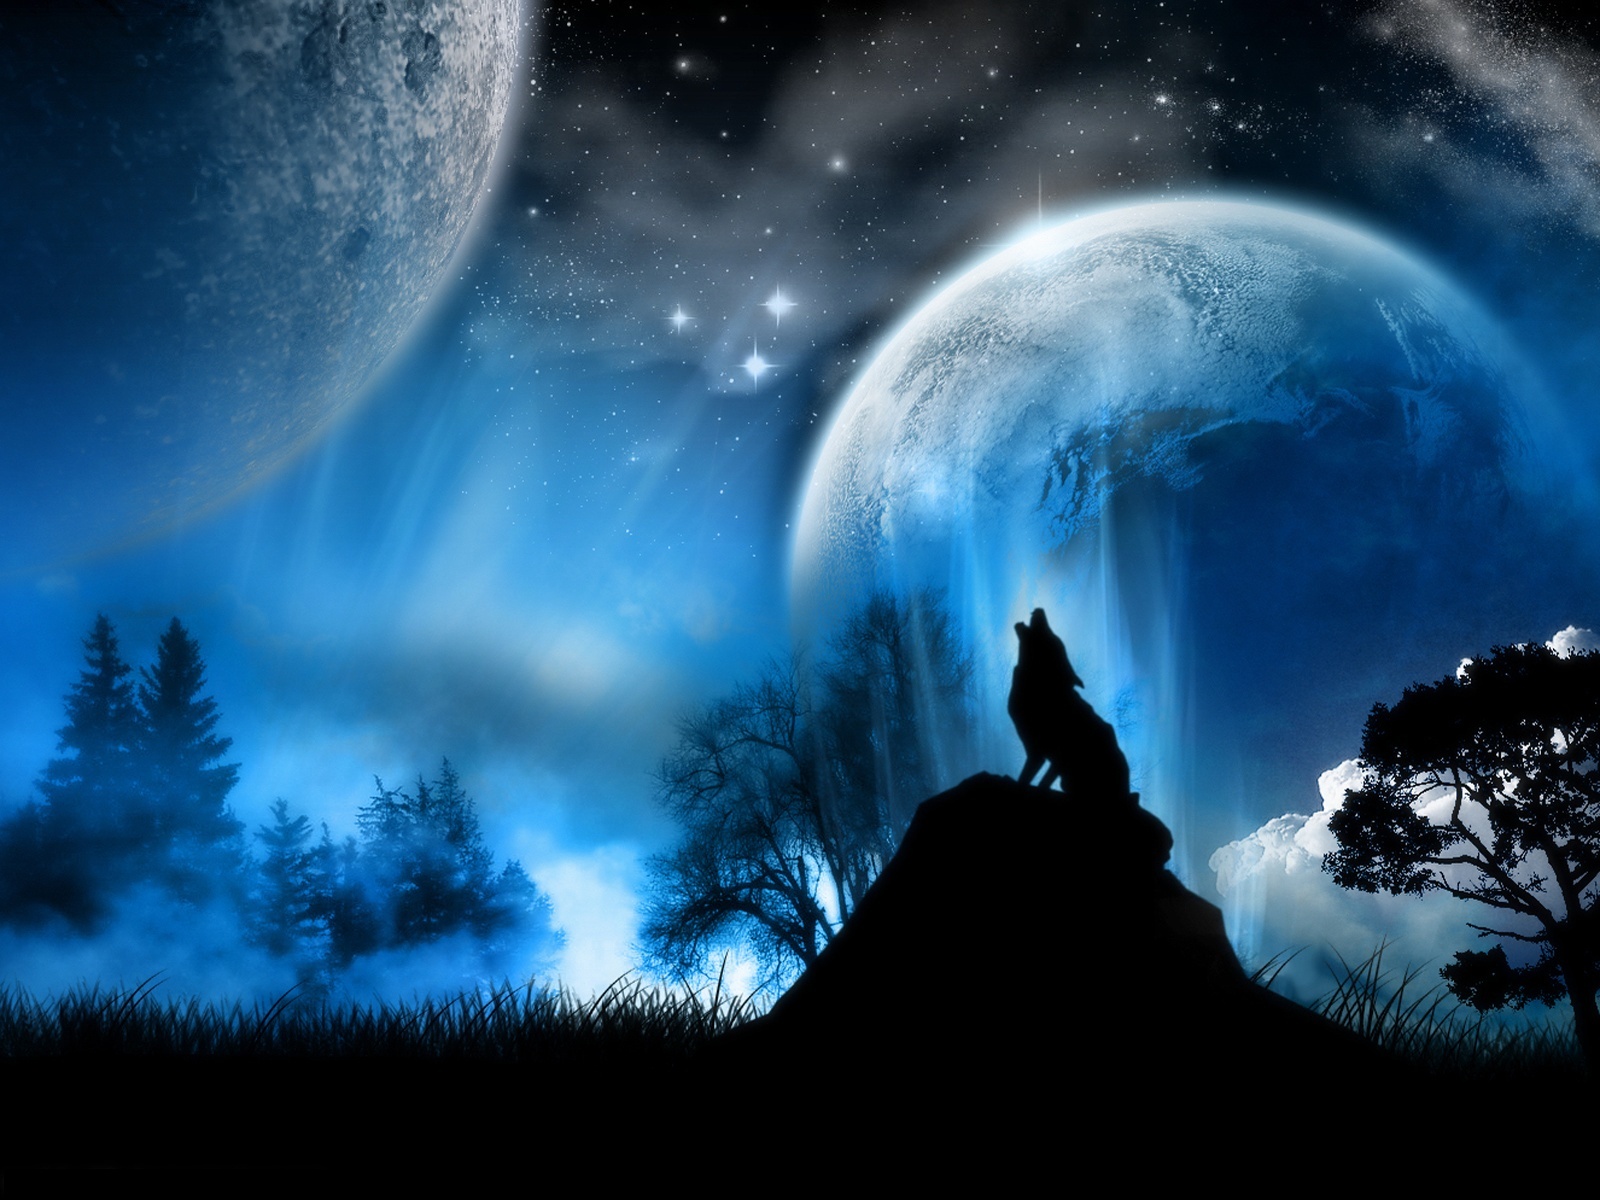 Howling Wolf Wallpapers For Desktop Backgrounds Free HD Wallpapers